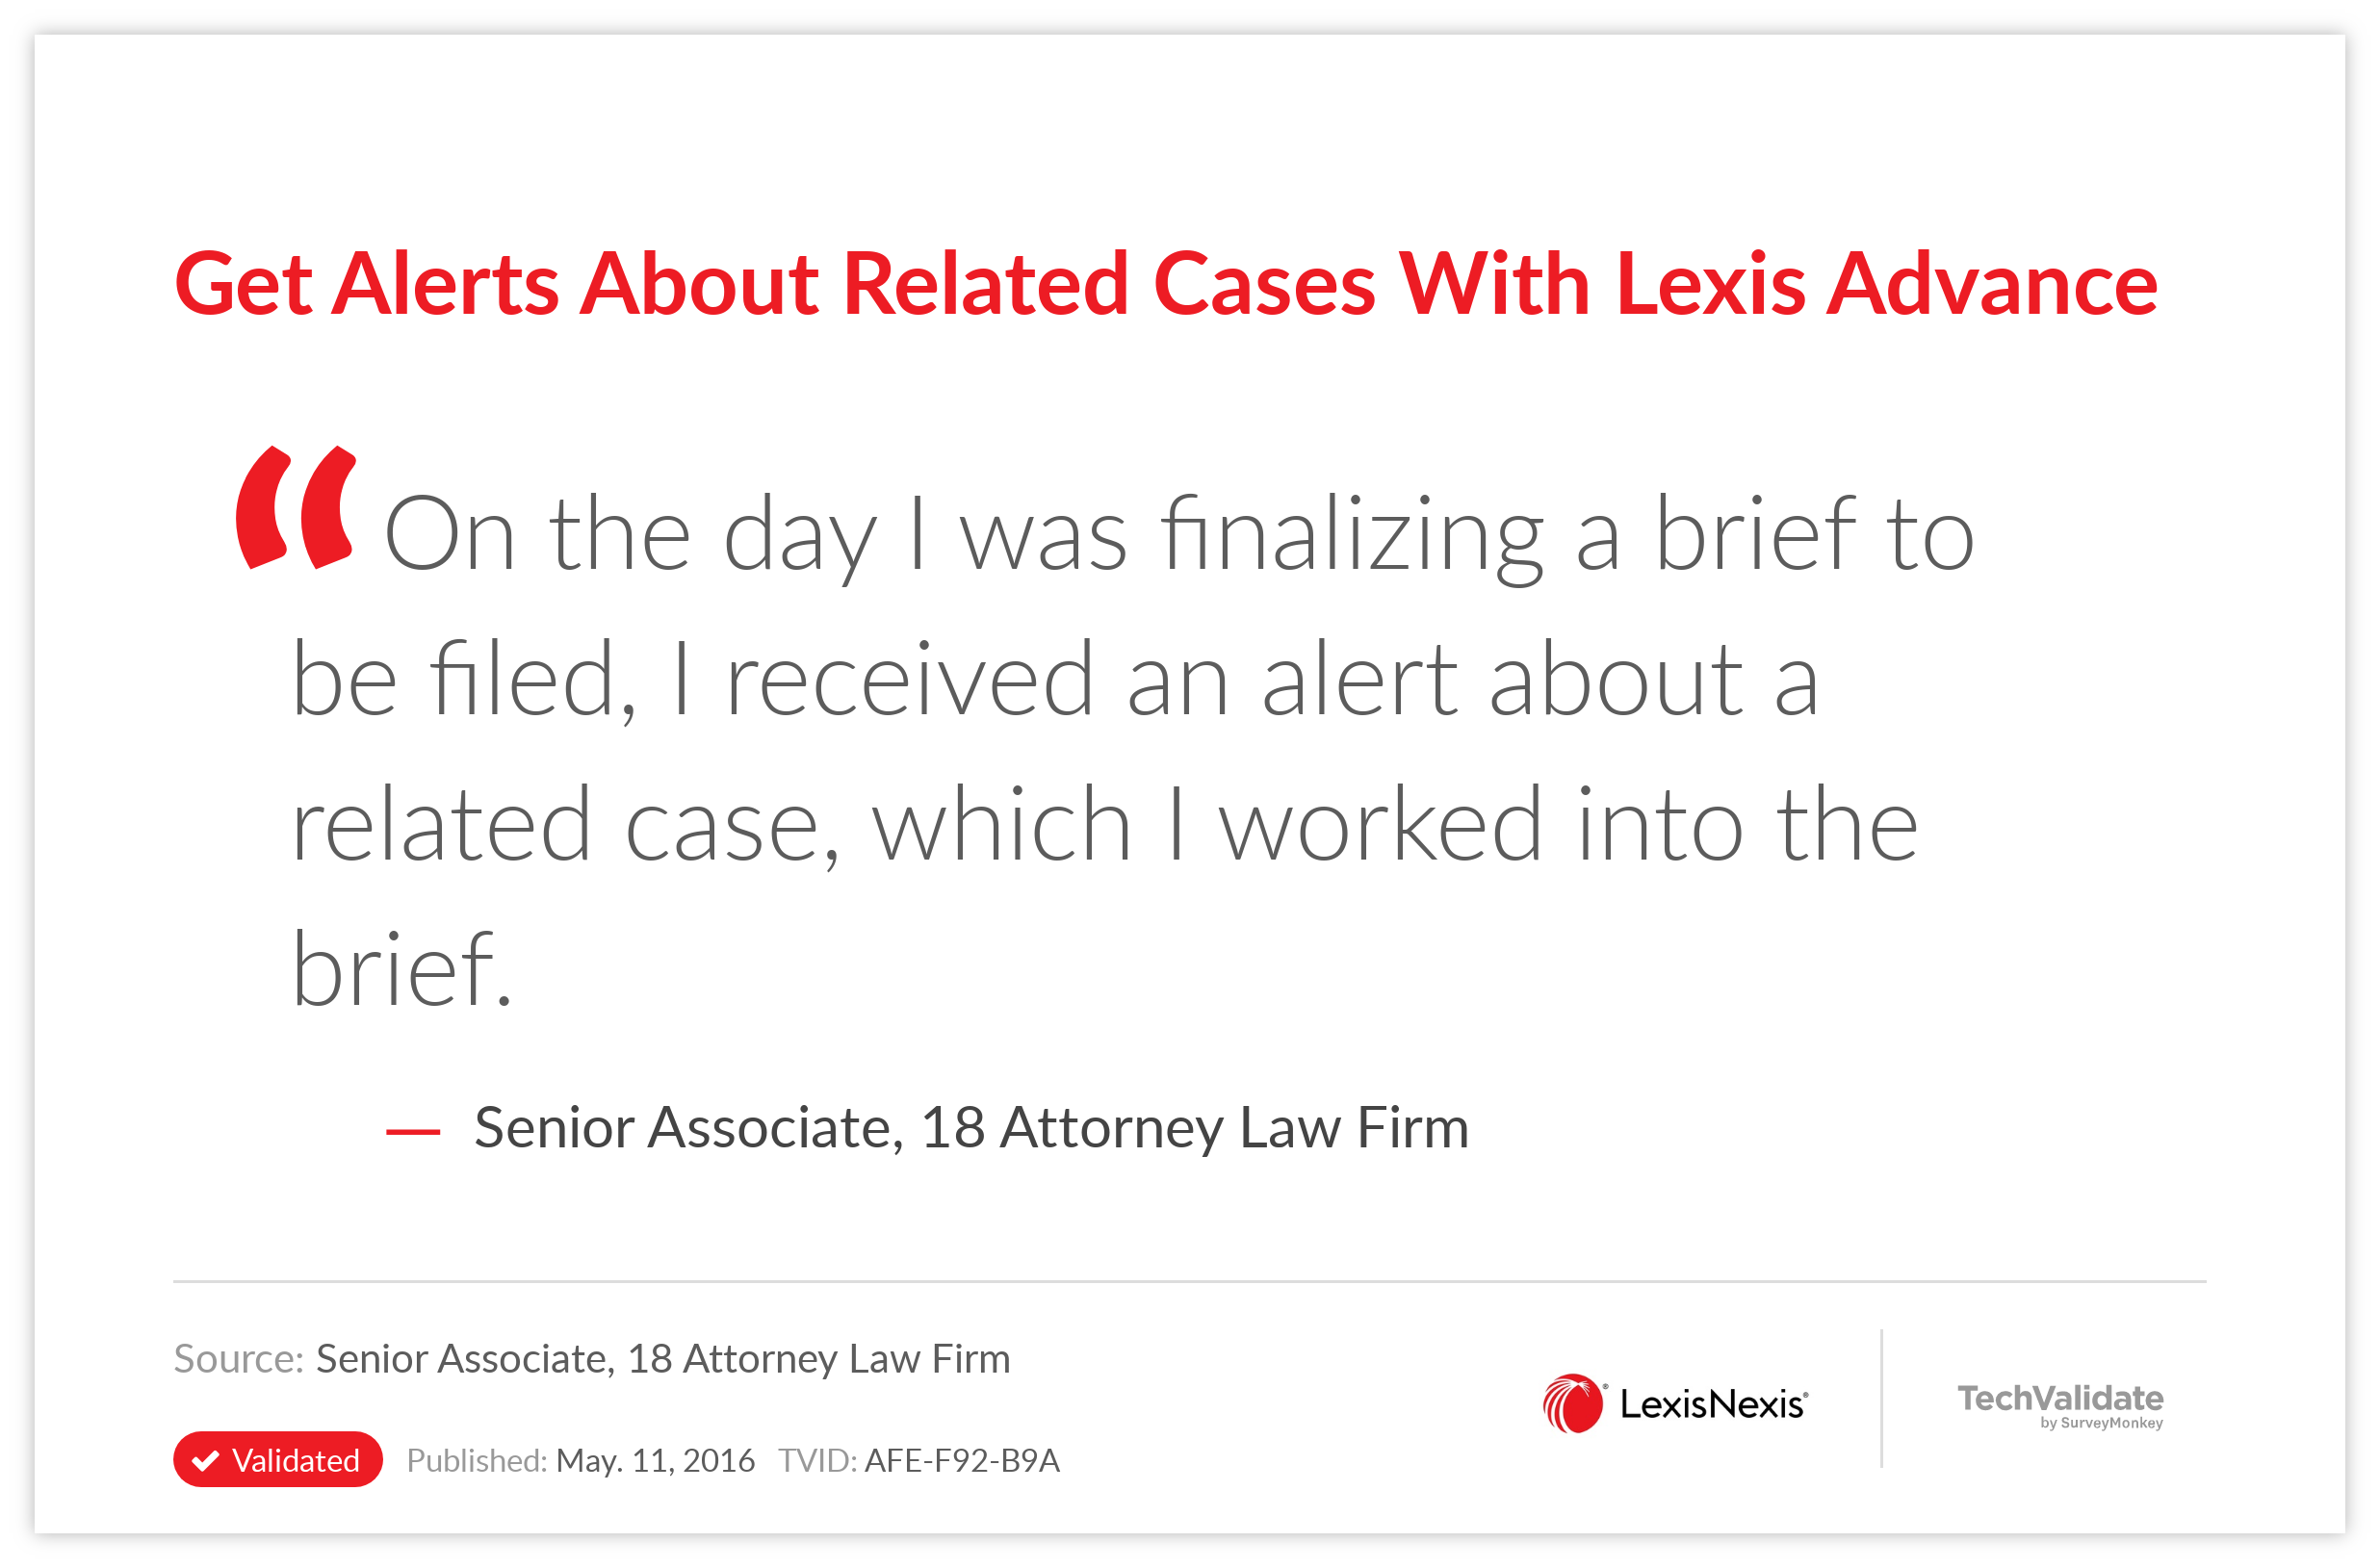 Get Alerts About Related Cases With Lexis Advance